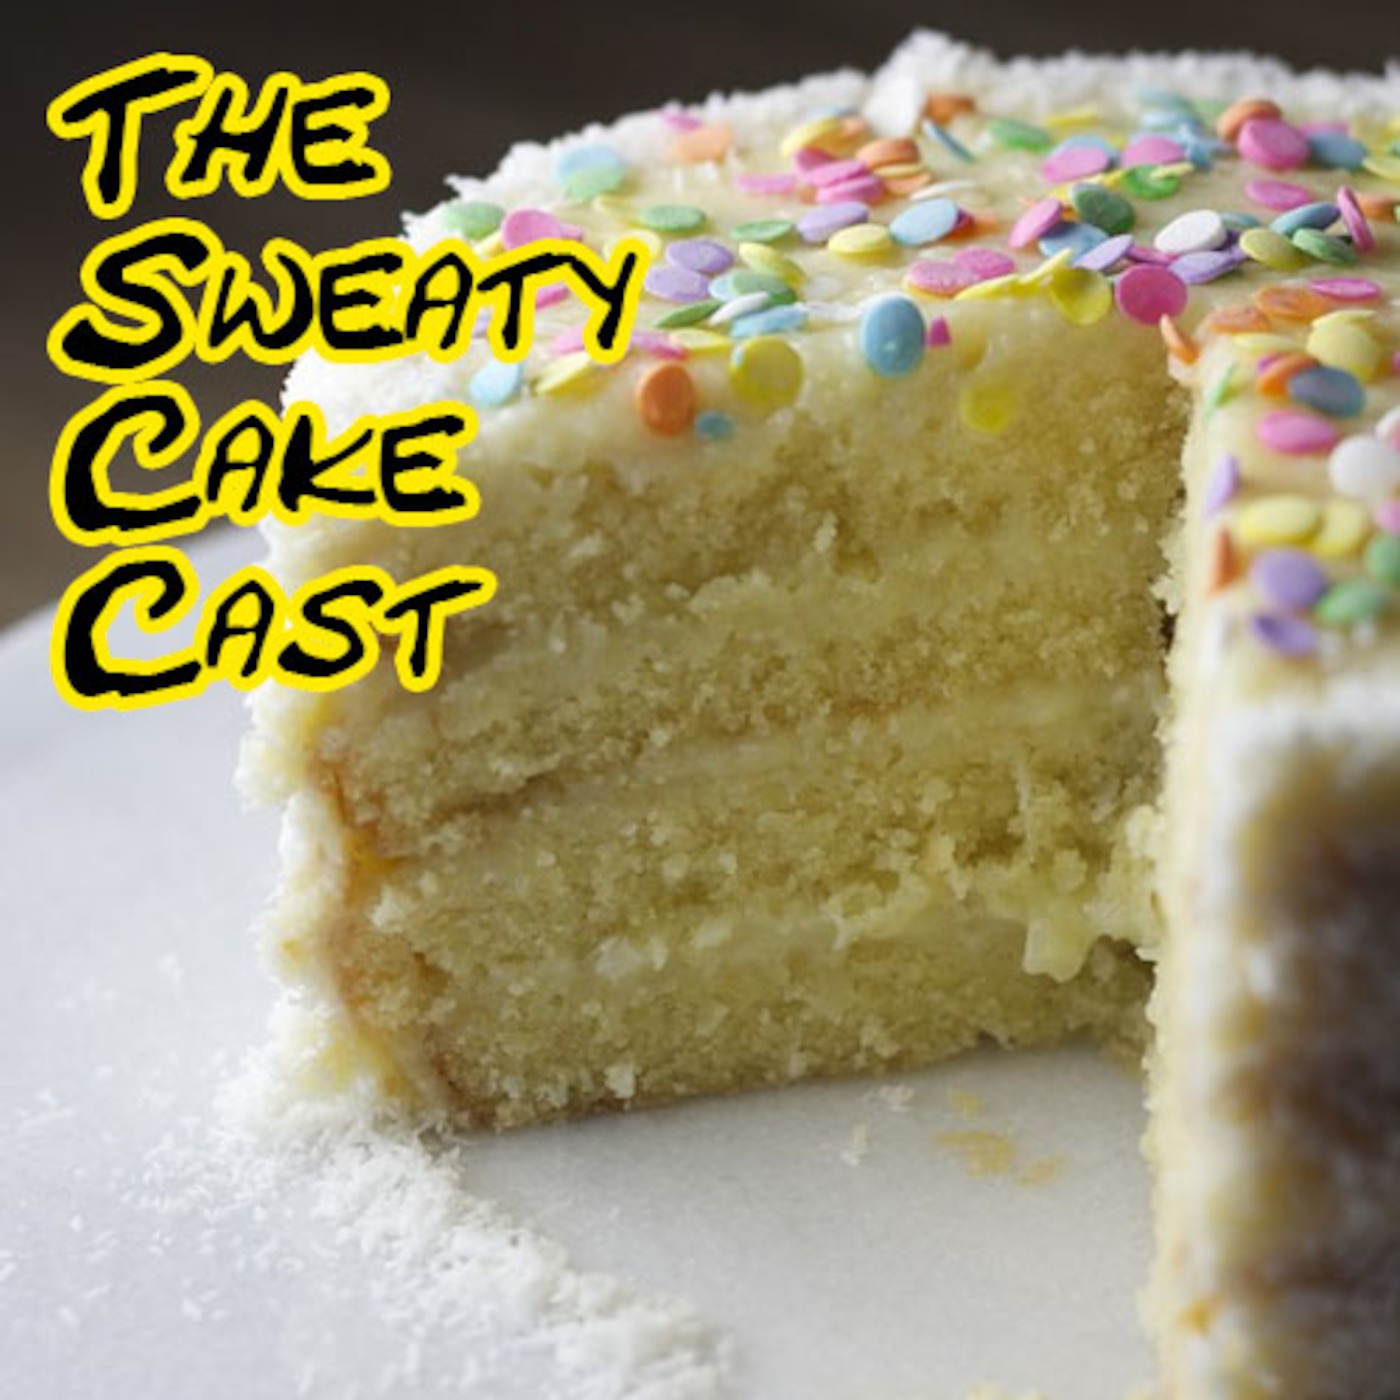 The Sweaty Cake Cast #3 - "Nicely poured concrete"